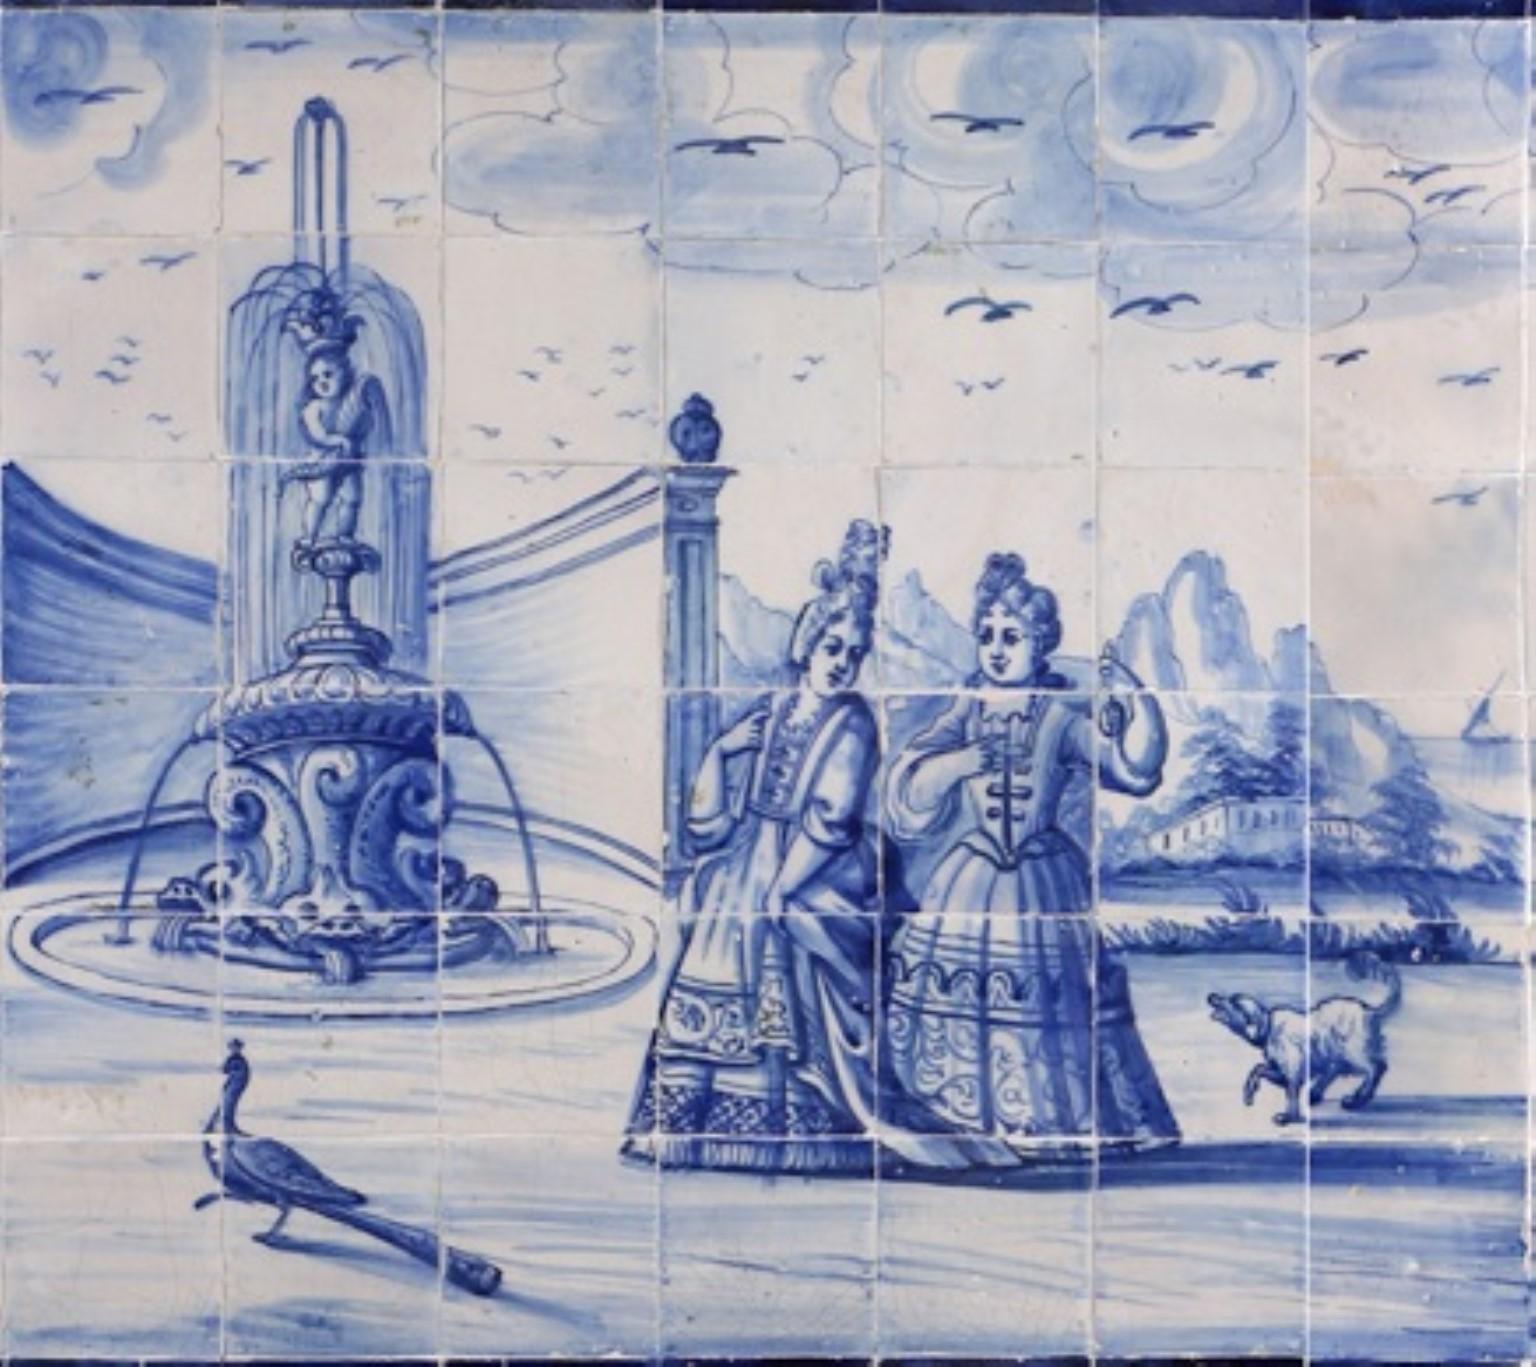 Important tiled mural from the master's cycle period in Portuguese tiles, produced in Lisboa, 1700-1730
Cobalt blue over white, 18th century baroque painting with an outdoor palatial garden by the sea.
The painting is attributed to the monogramist